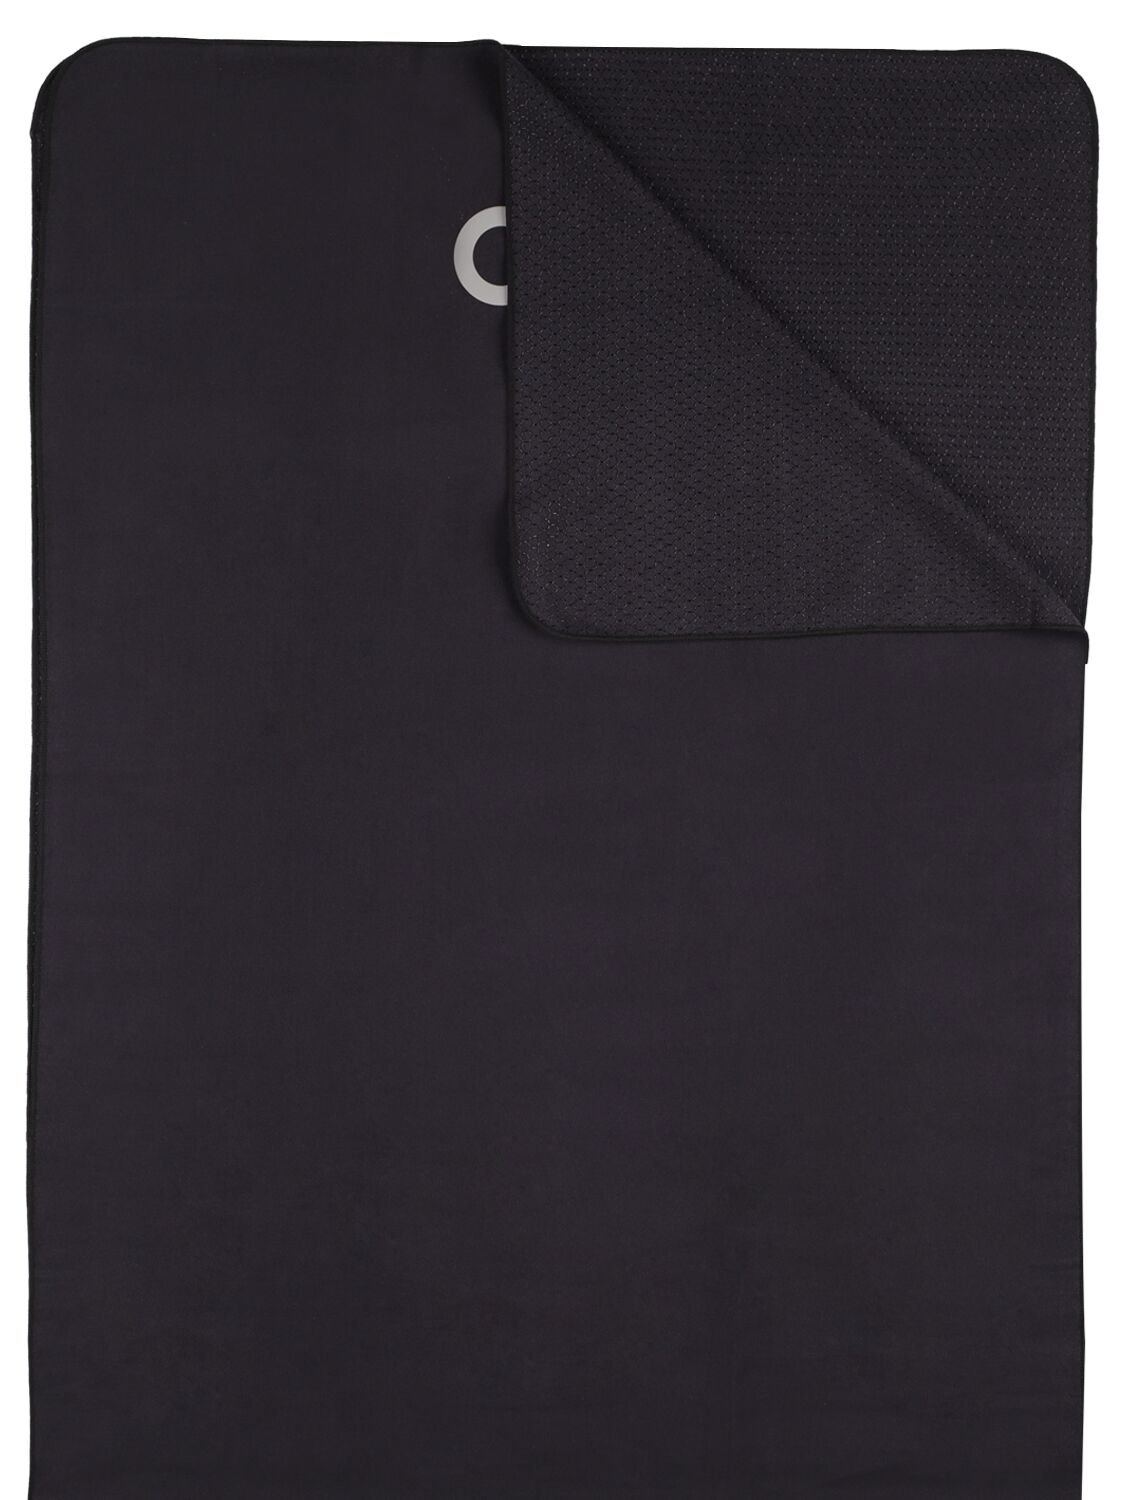 Image of Grounded Non-slip Towel-mat